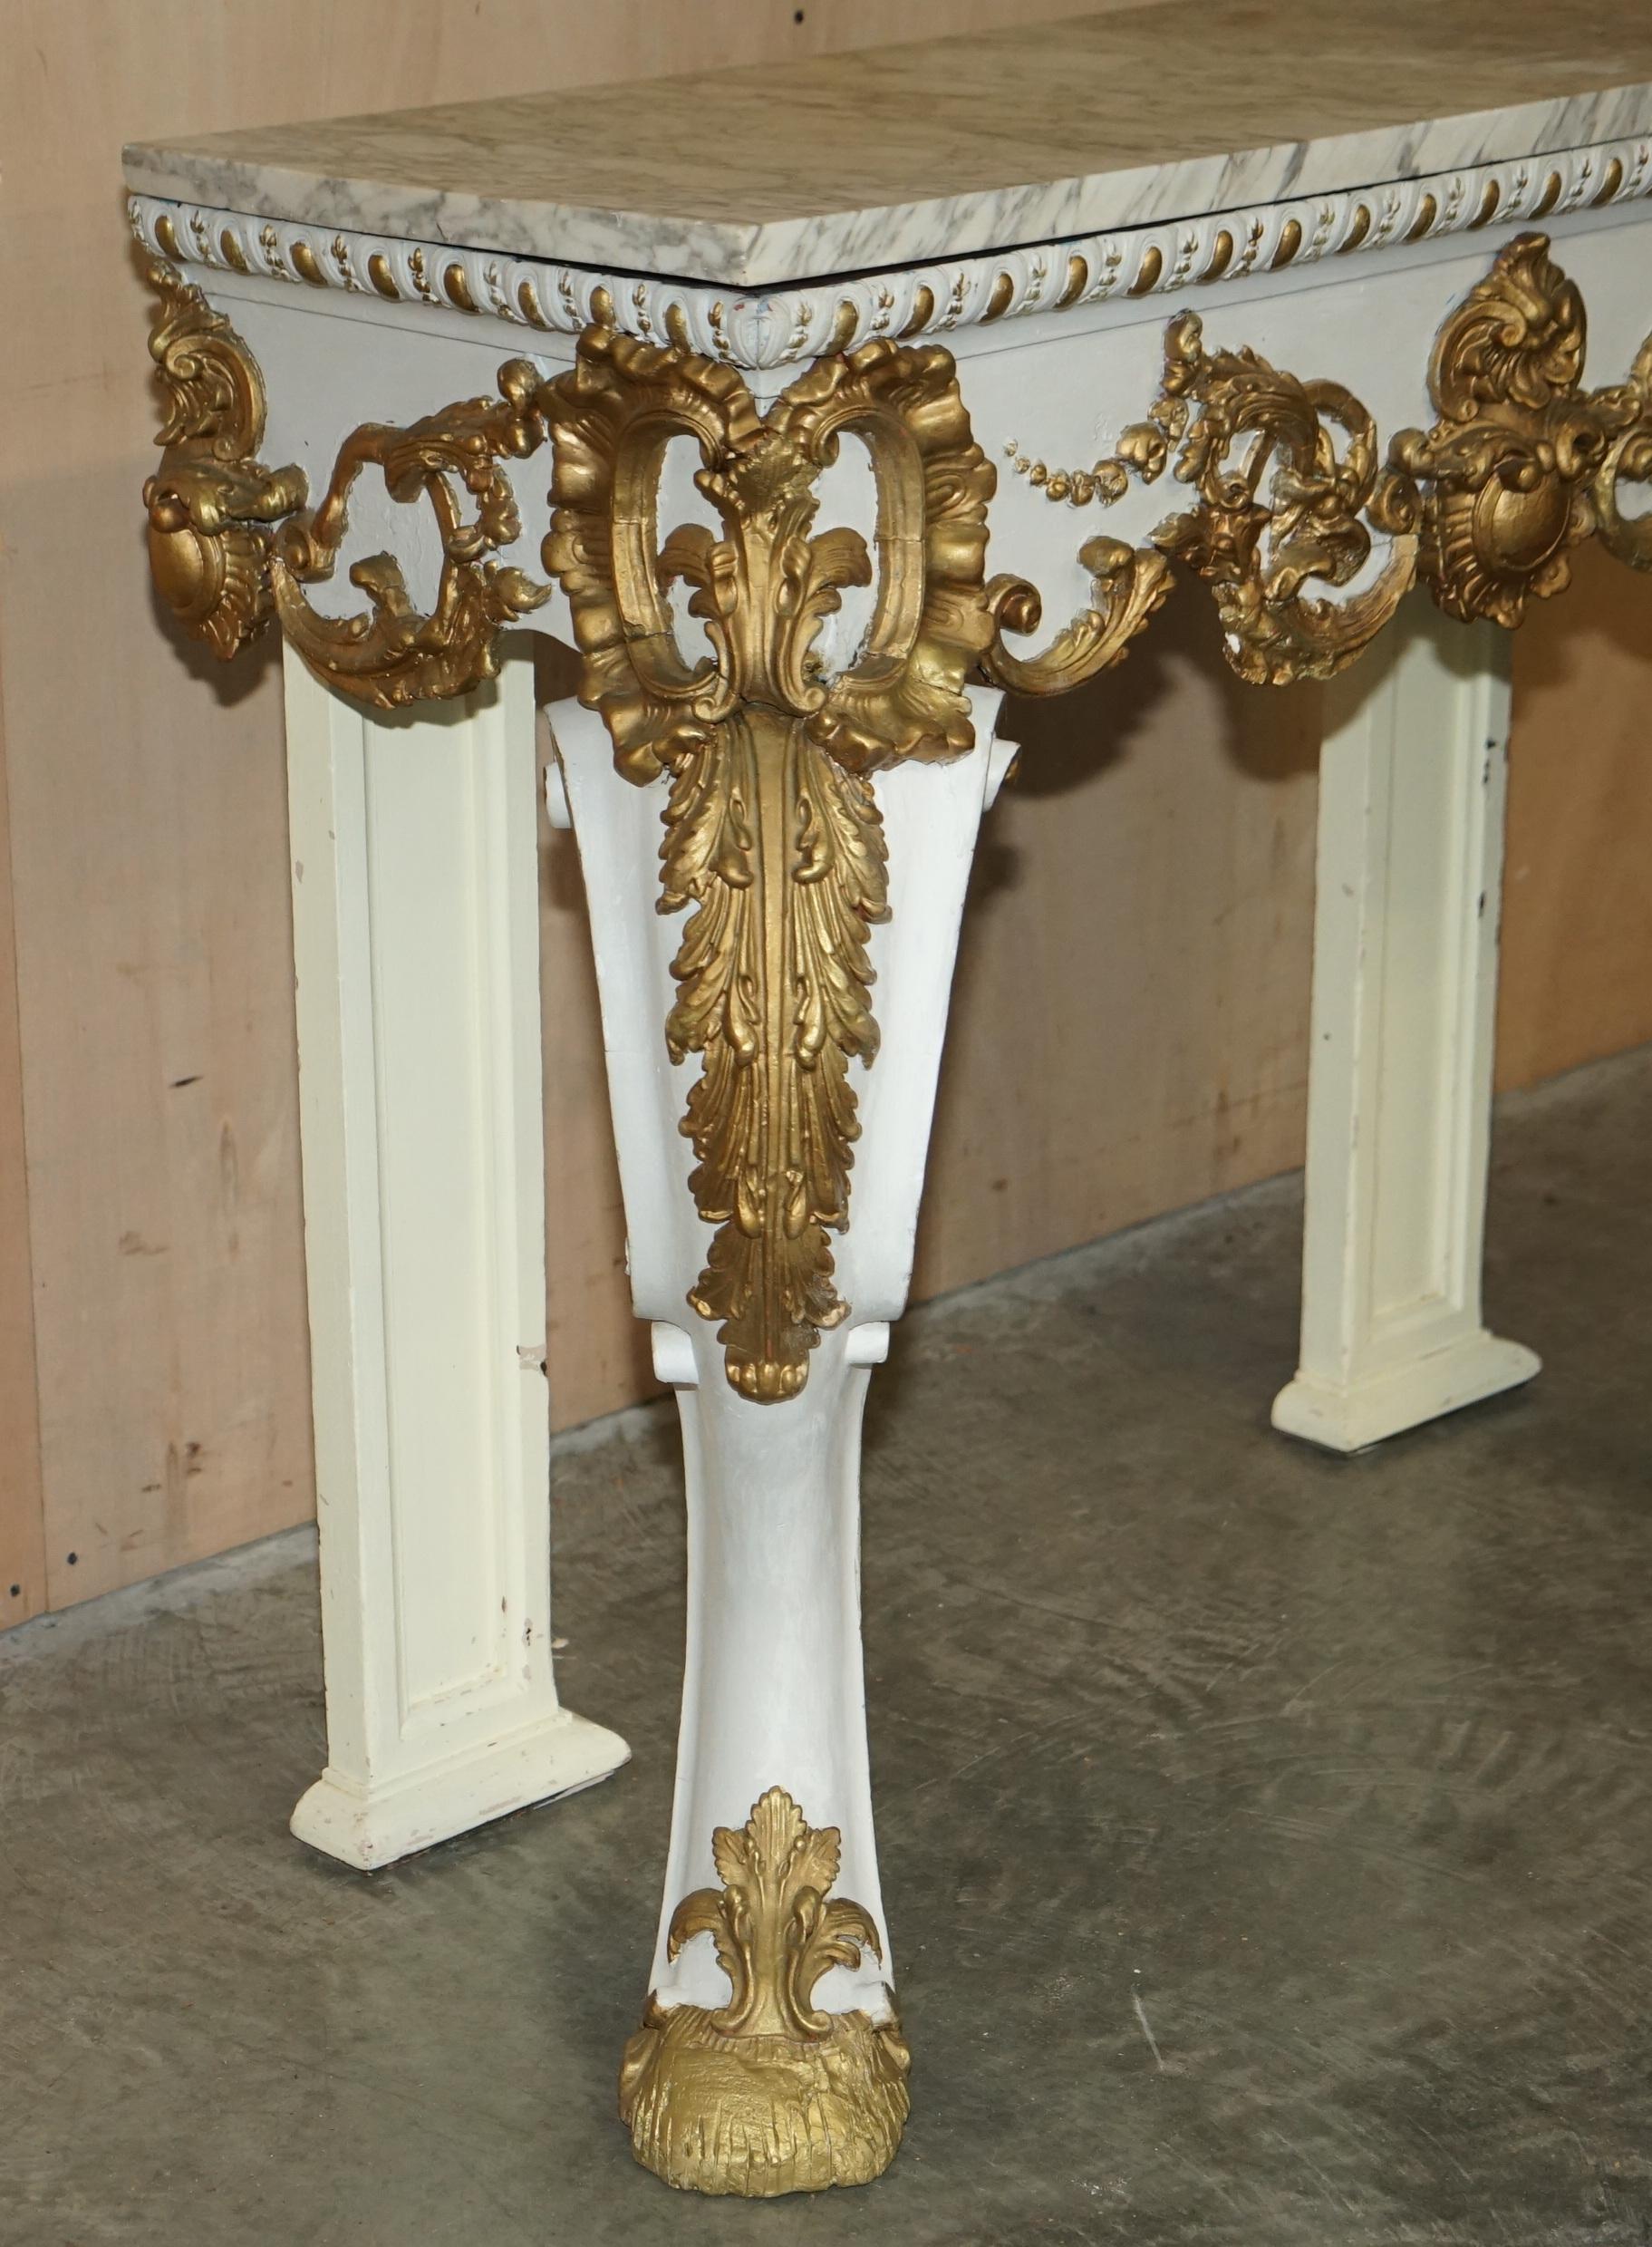 Mid-19th Century ANTIQUE ITALIAN HAND CARVED GiLTWOOD & MARBLE CONSOLE TABLE CIRCA 1860 VENICE For Sale